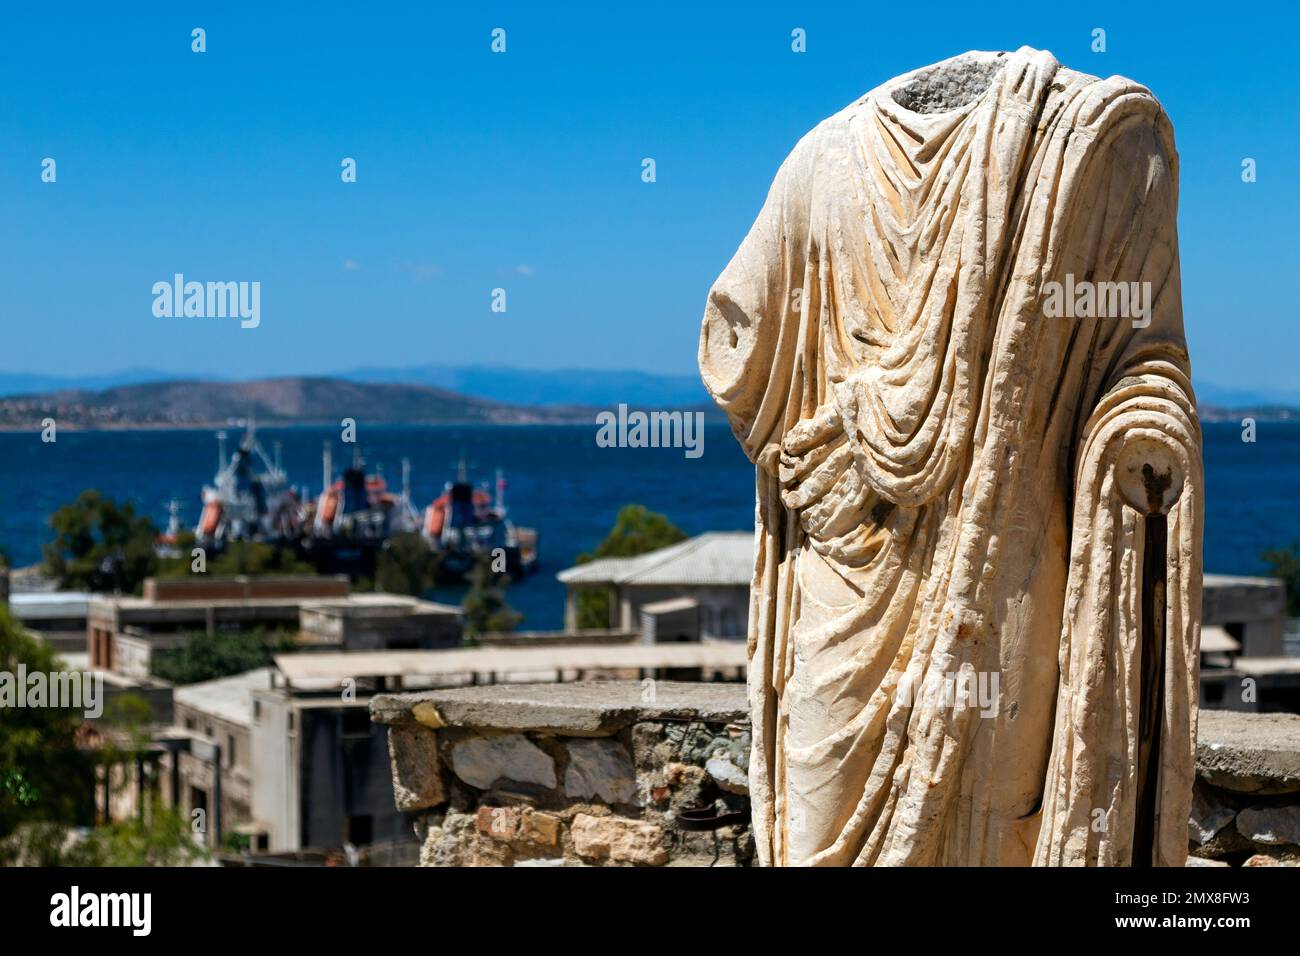 Roman era statue at the archaeological site of Elefsis, Greece, the 2023 European Capital of Culture. Stock Photo